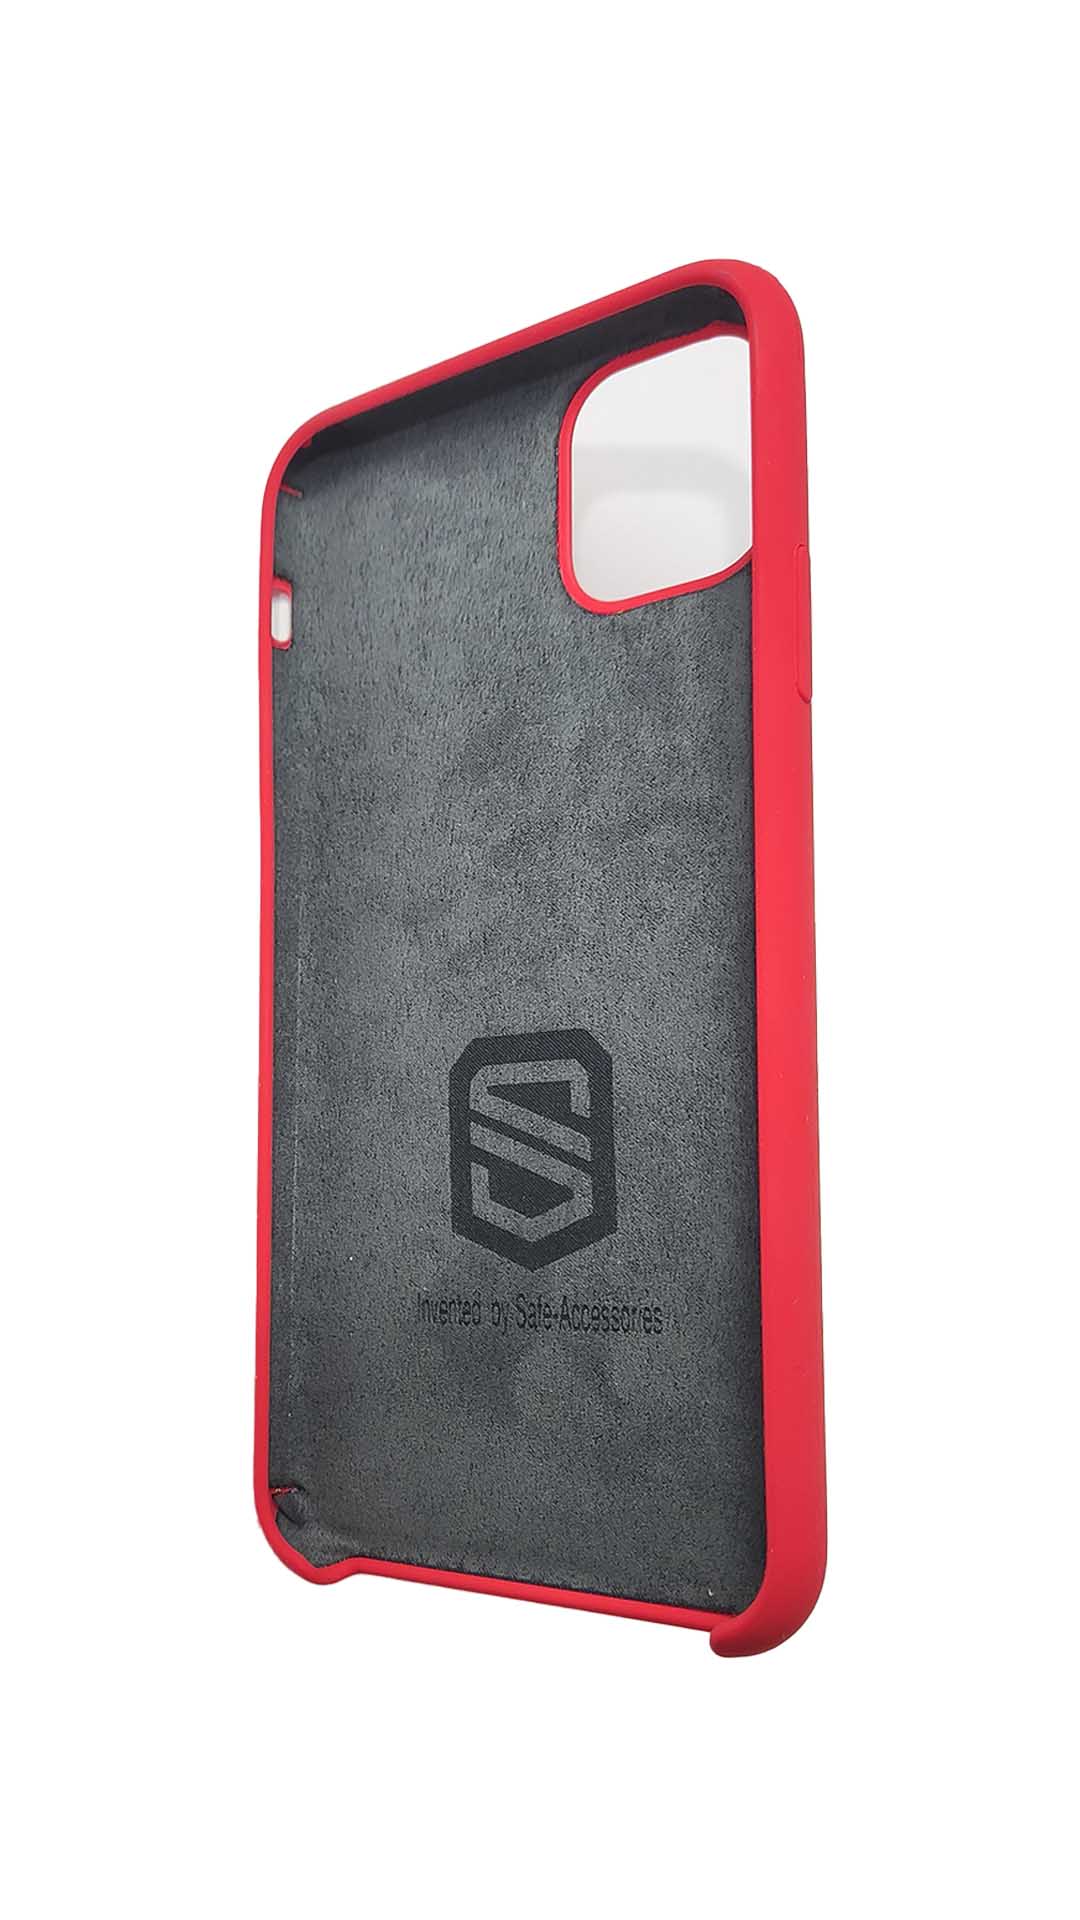 Inside view of Red Safe-Case for iPhone 11 Pro Max 